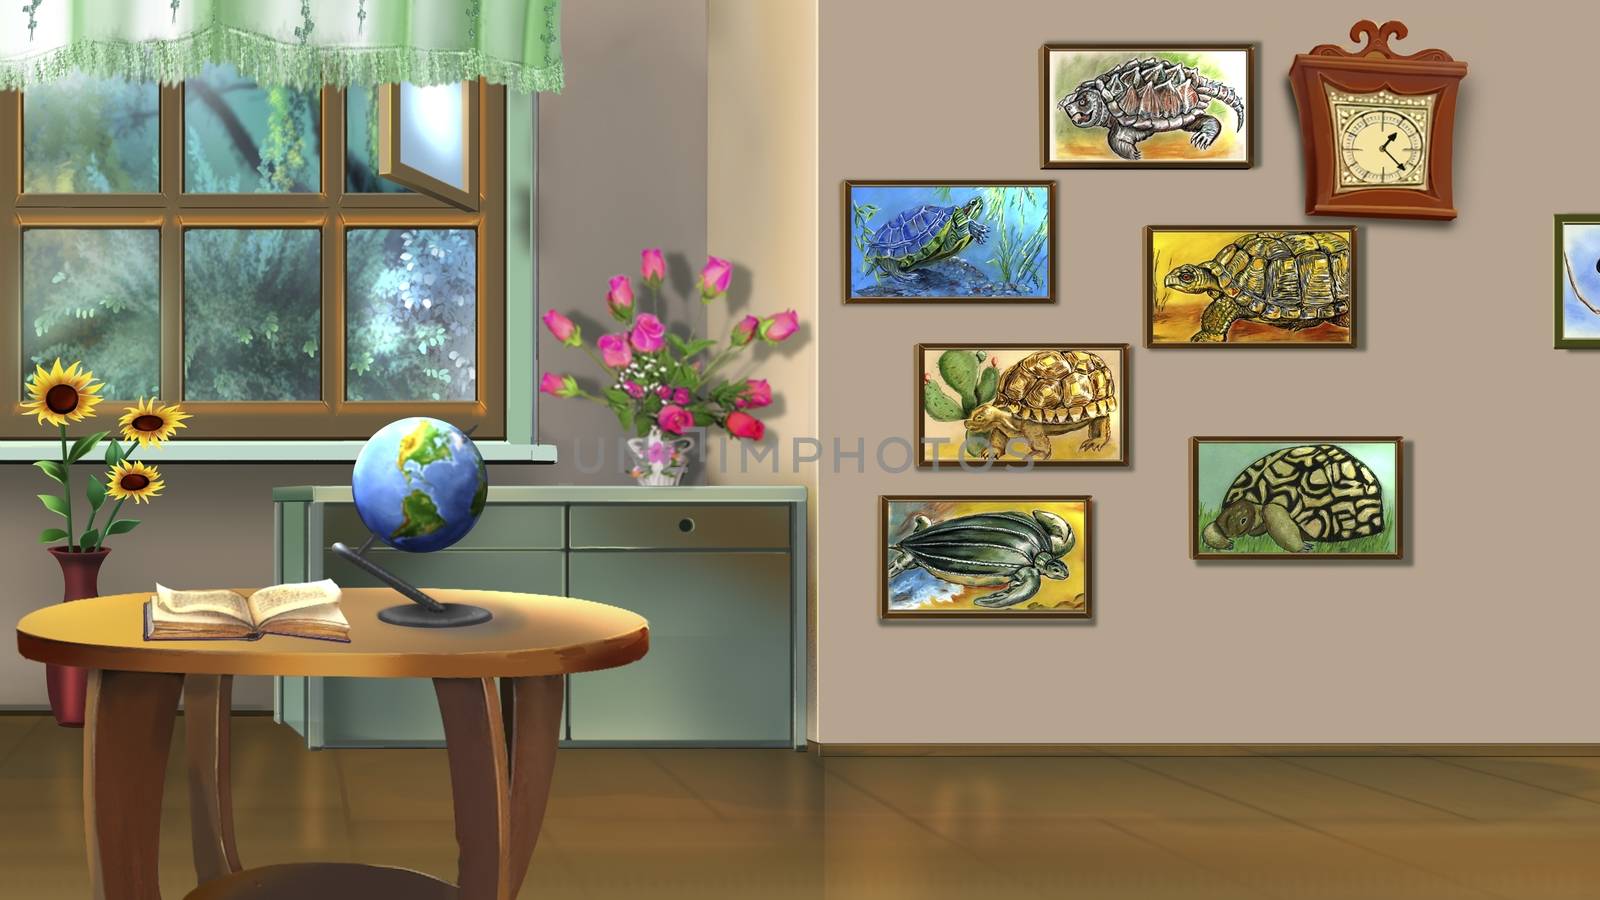 Room Interior with Turtle Pictures by Multipedia